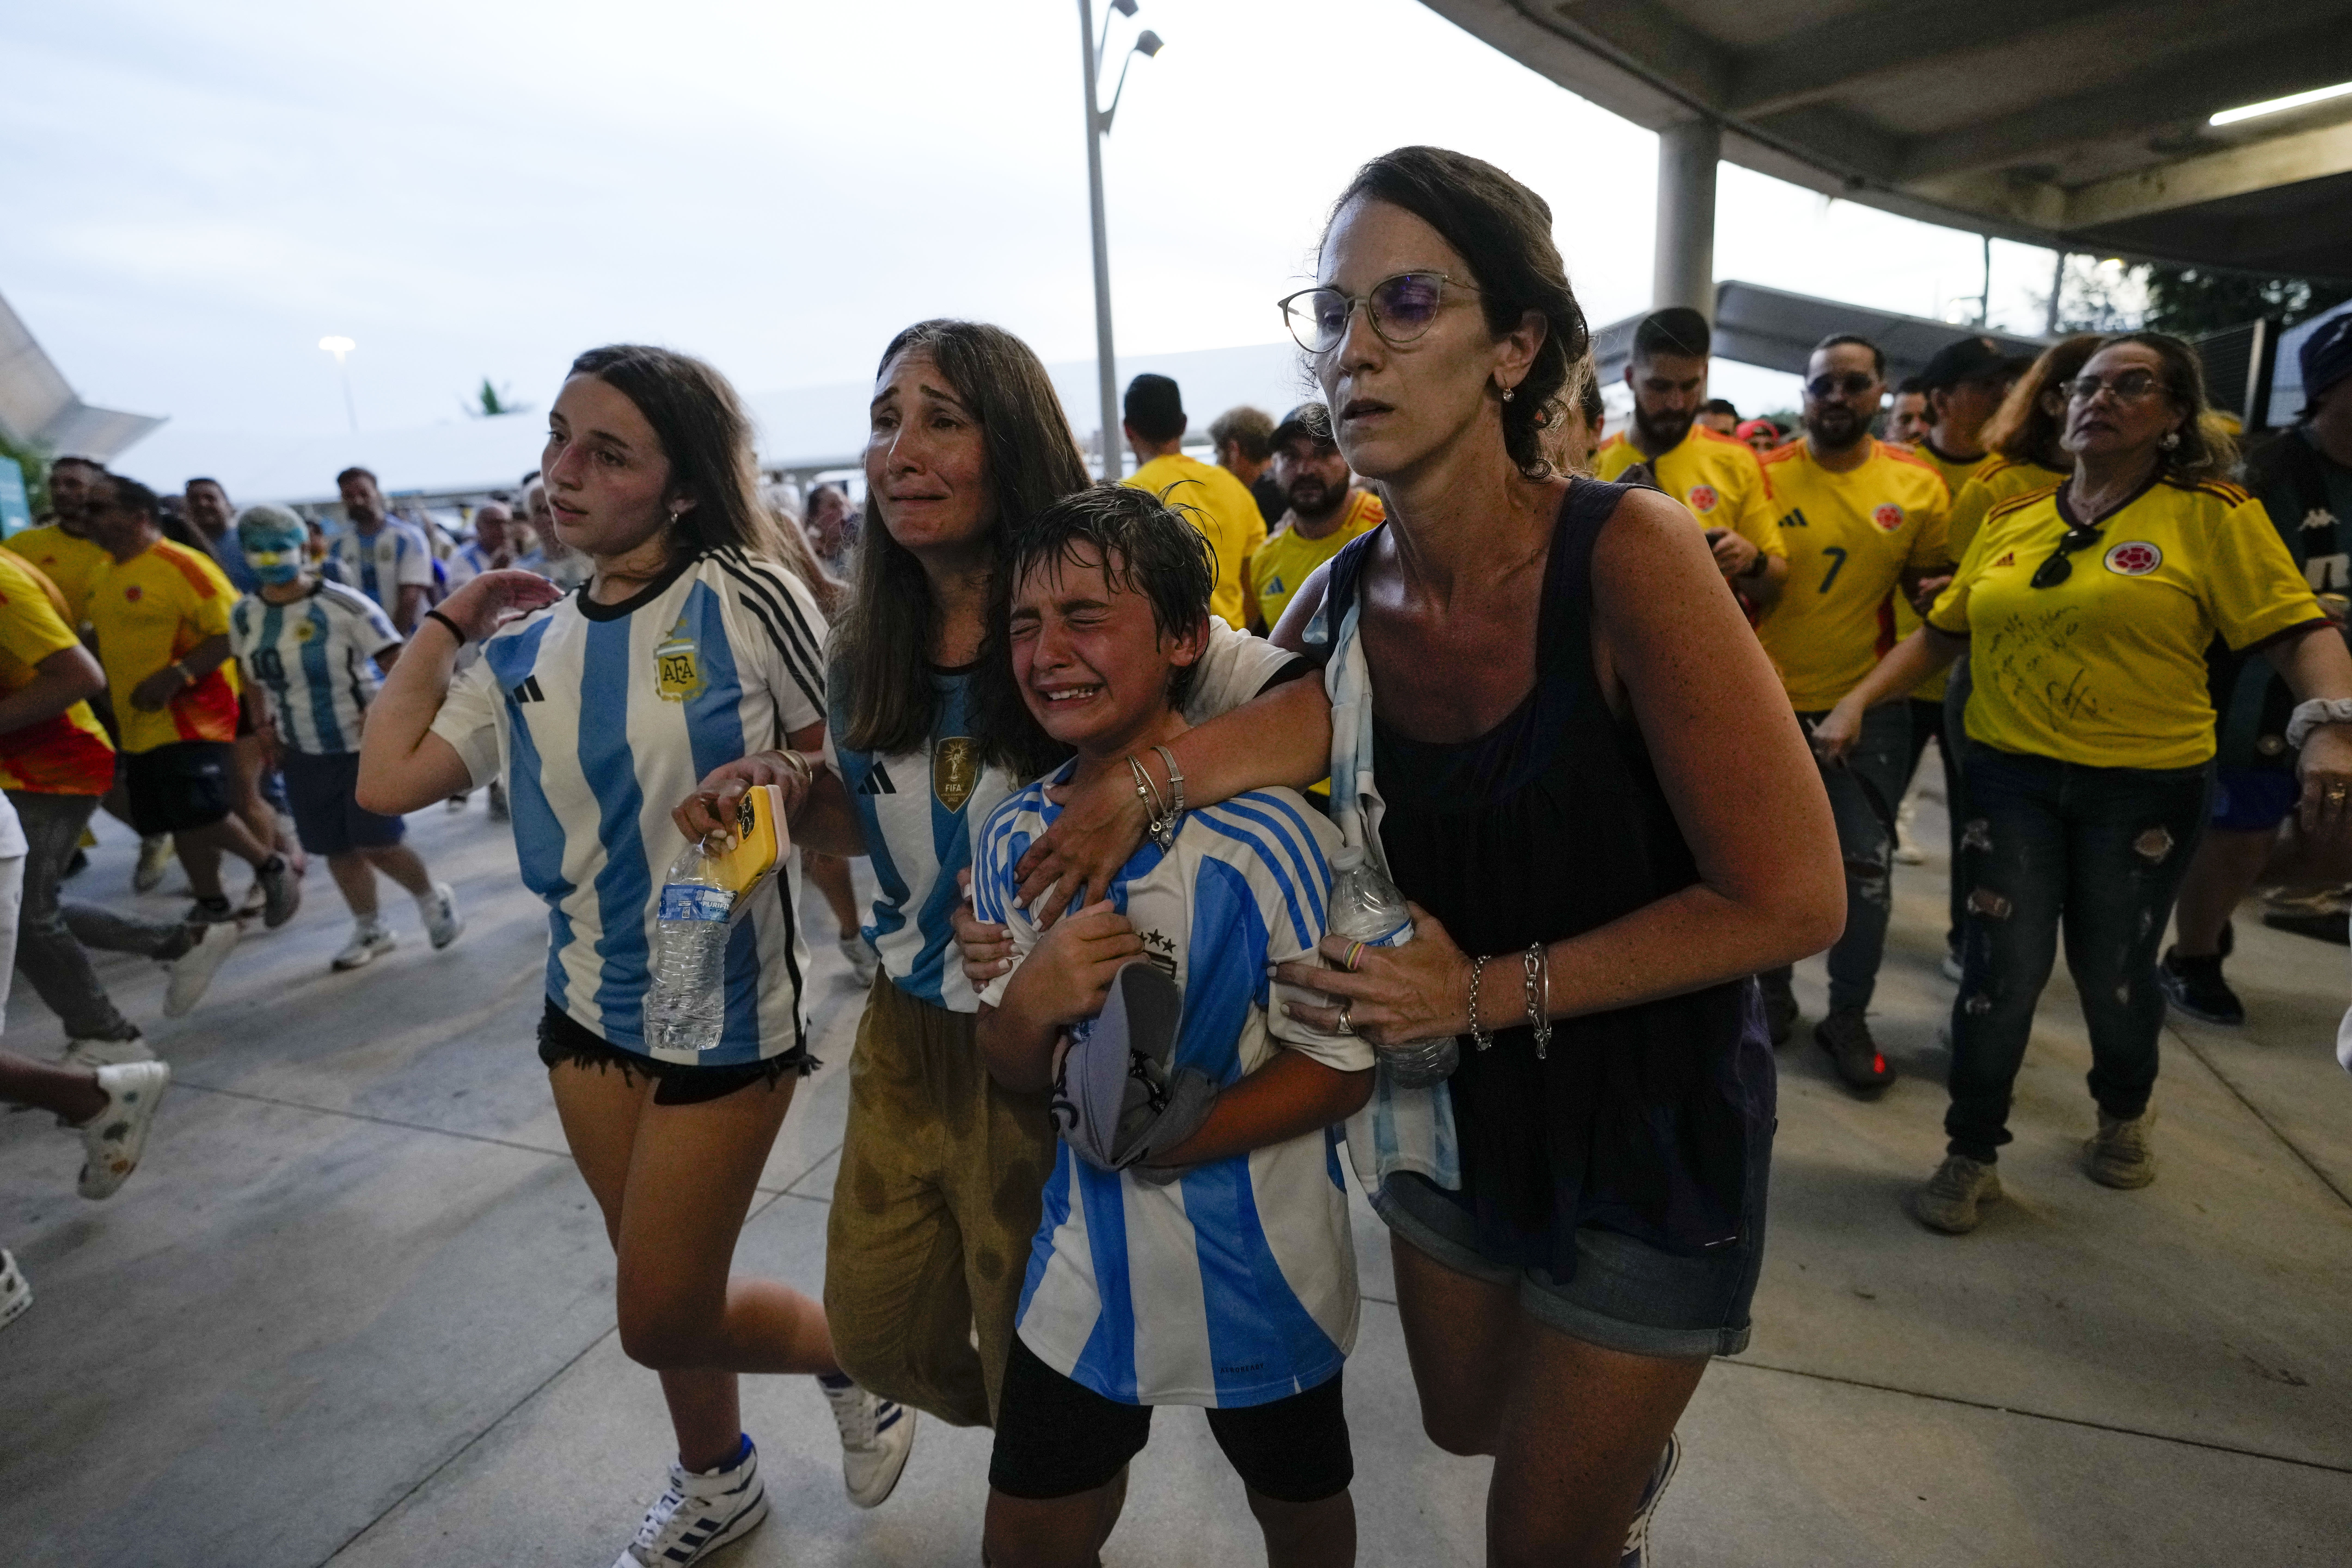 Copa América final chaos: Game delayed, fans stuck outside after gates breached and closed